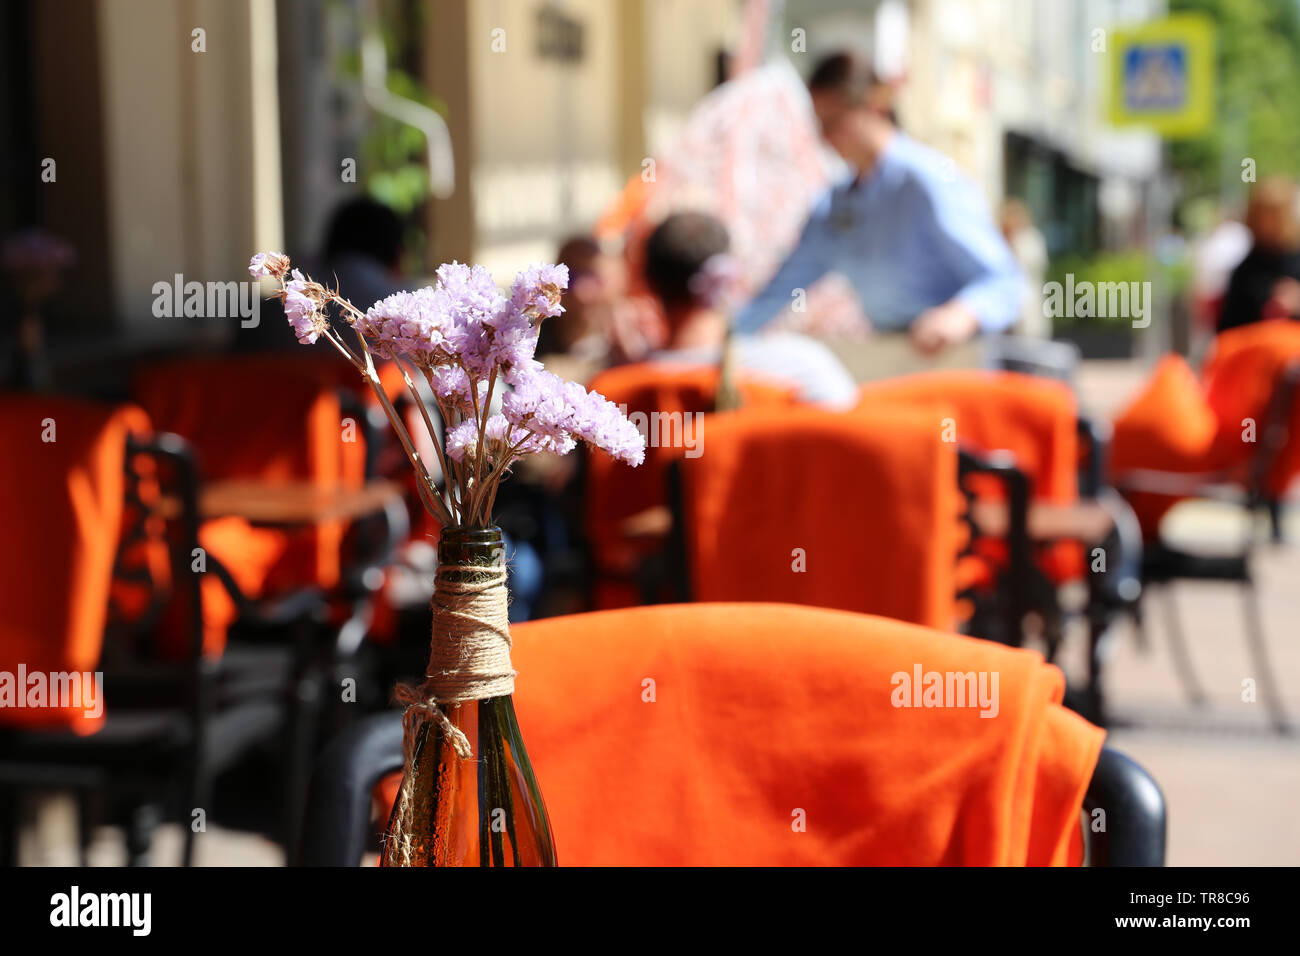 People in street cafe, tables in a restaurant outdoor. Romantic dinner in summer city, visitors and waiter, elegant setting for celebration and date Stock Photo